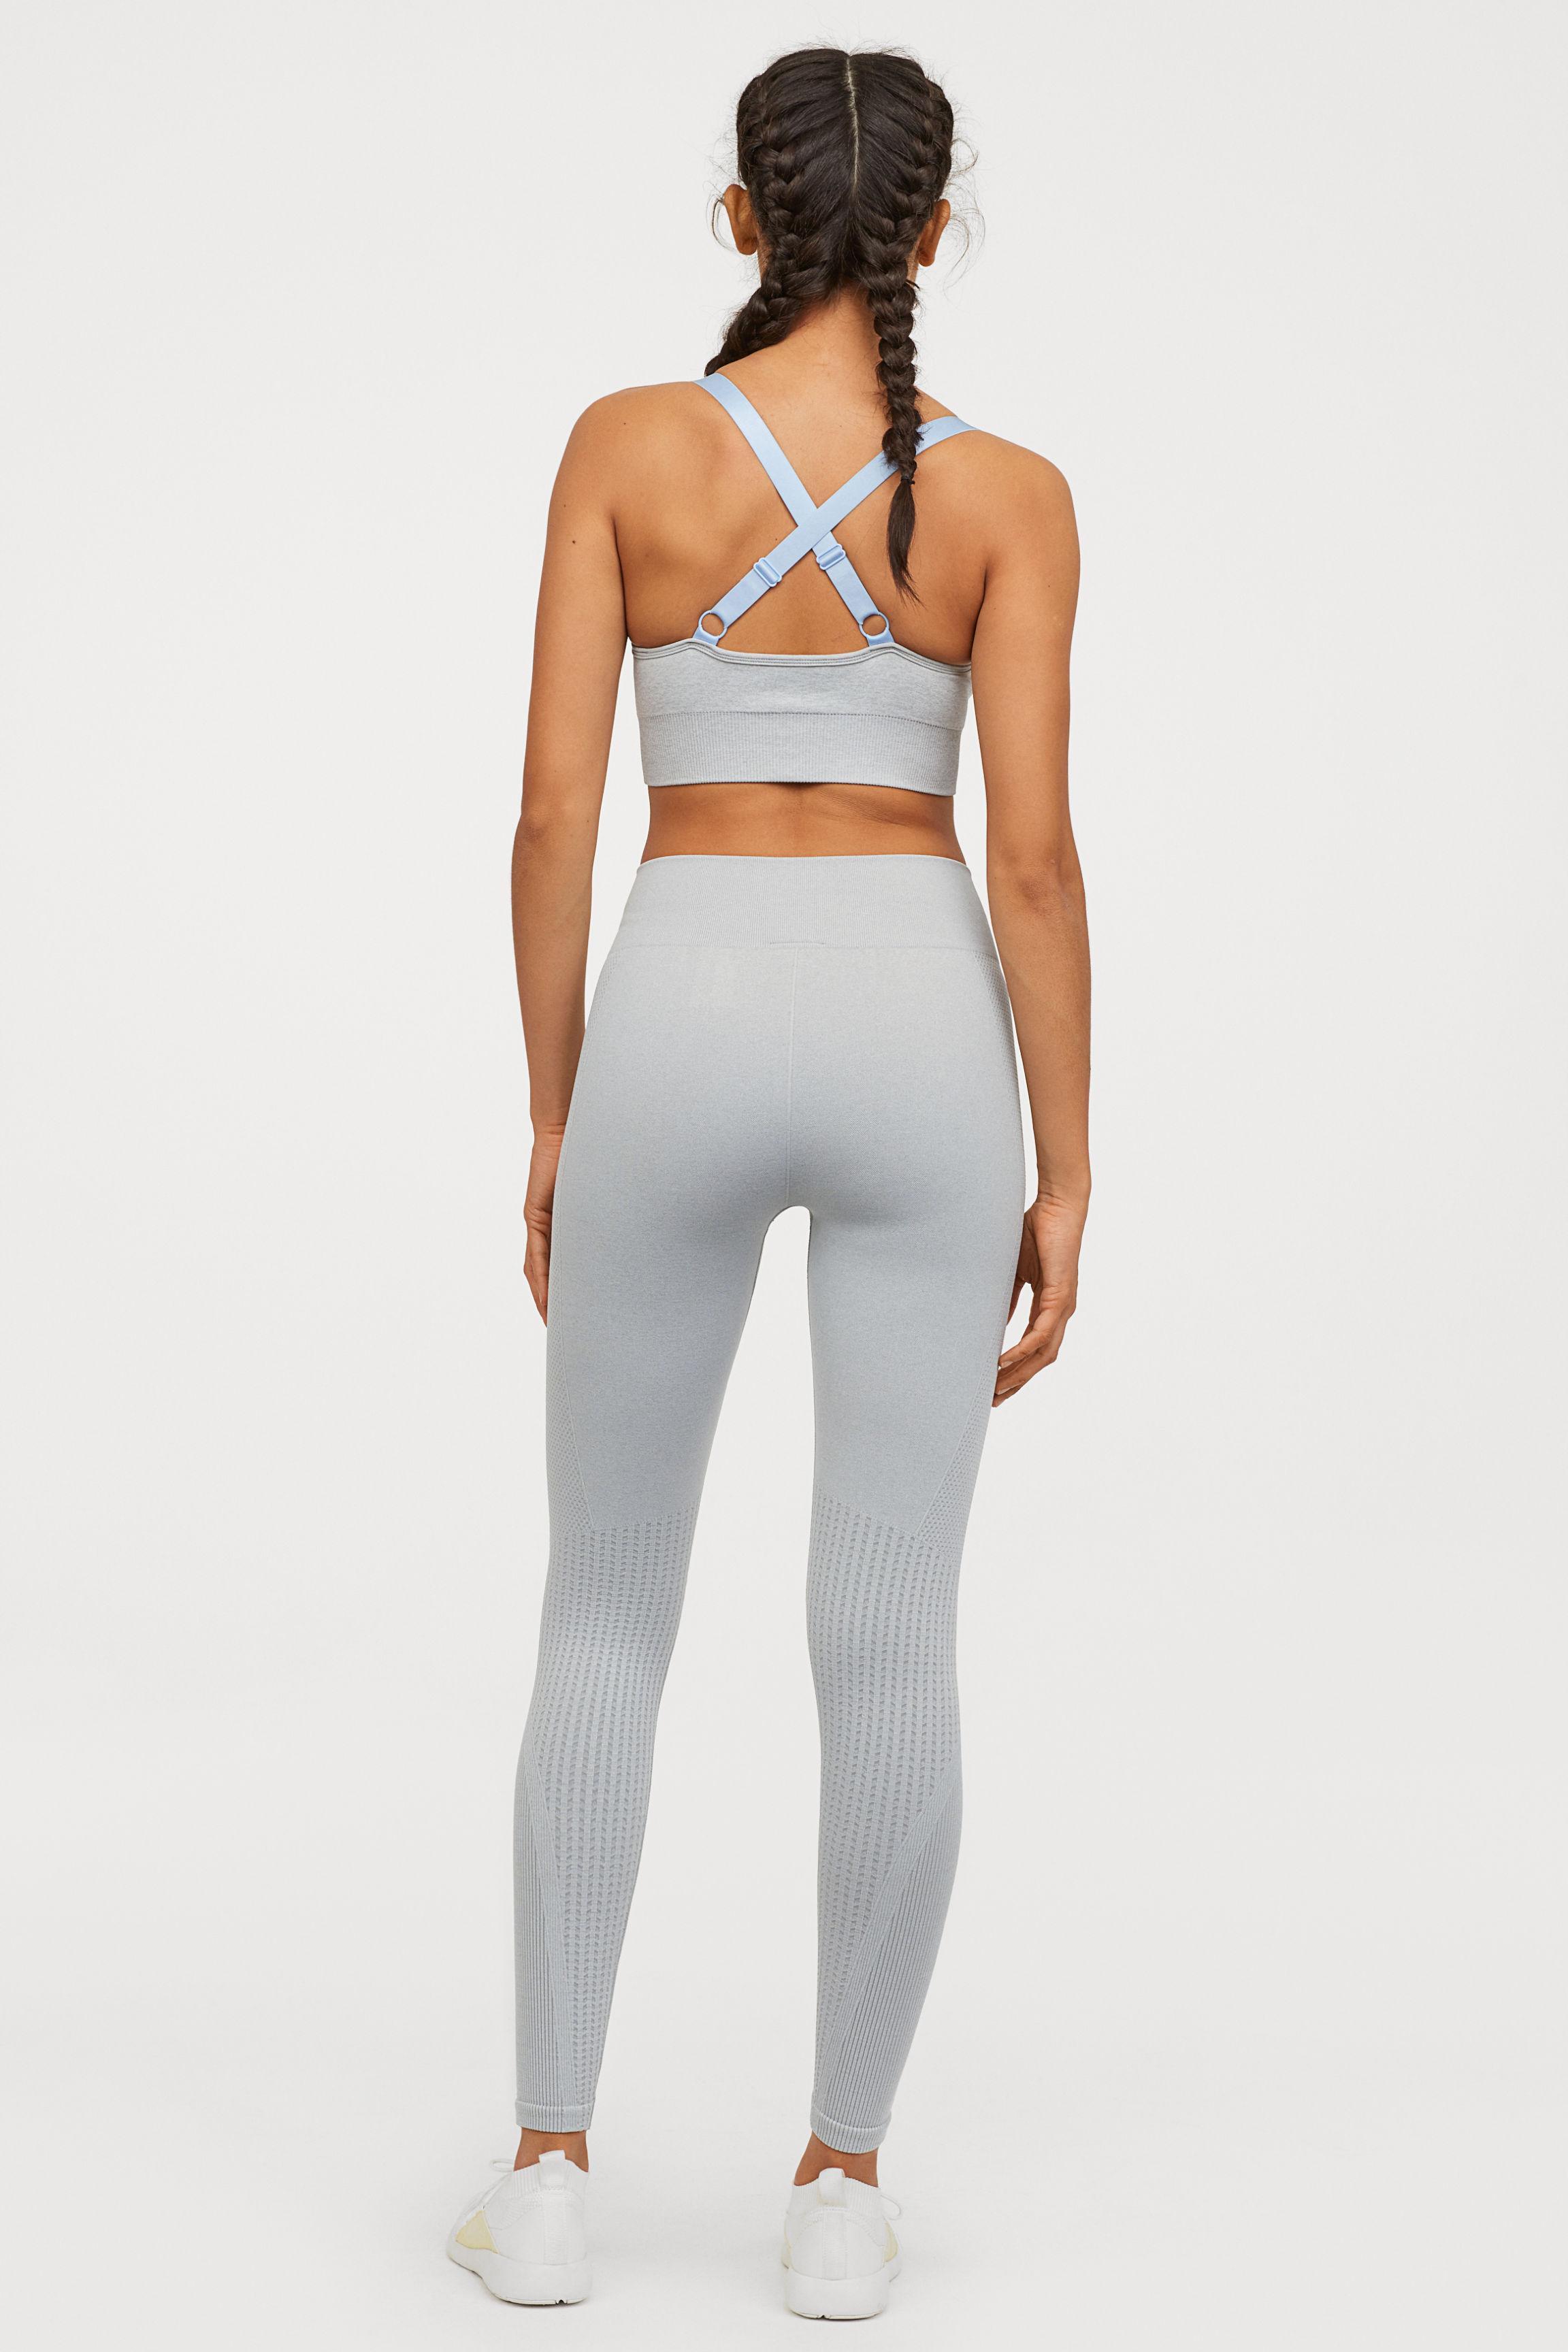 H&m Leggings Sport  International Society of Precision Agriculture